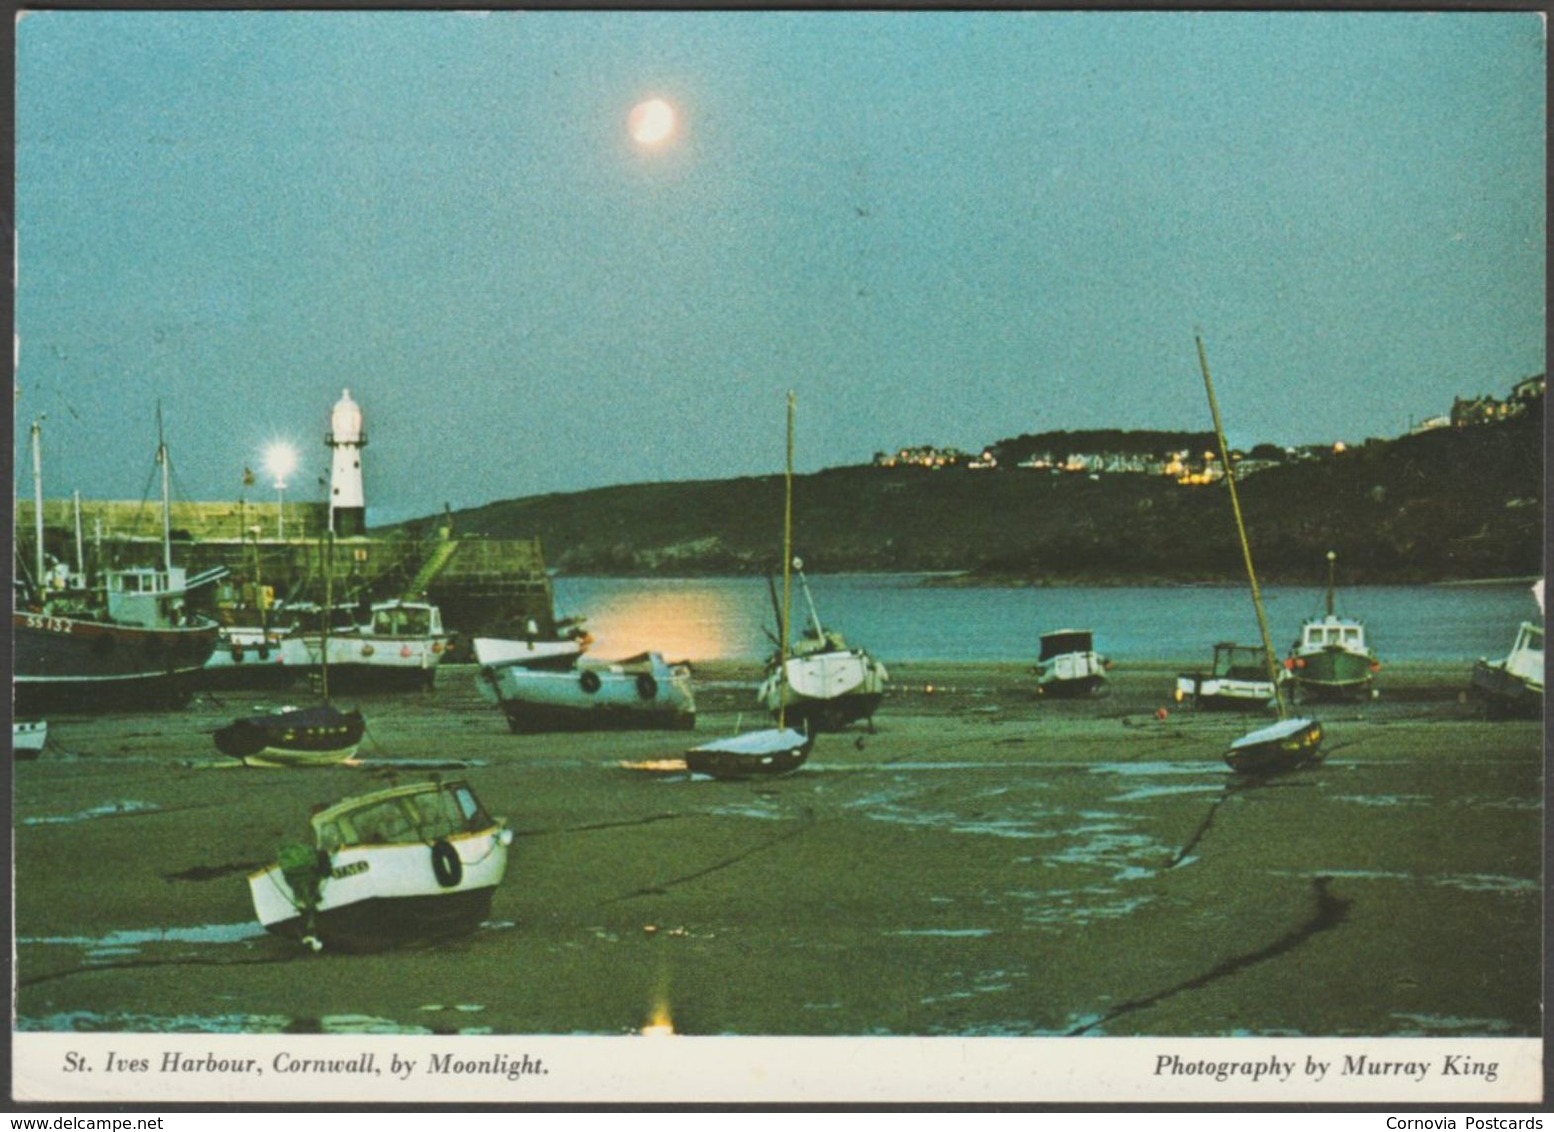 Partial Lunar Eclipse, St Ives Harbour, Cornwall, 1974 - Murray King Postcard - St.Ives